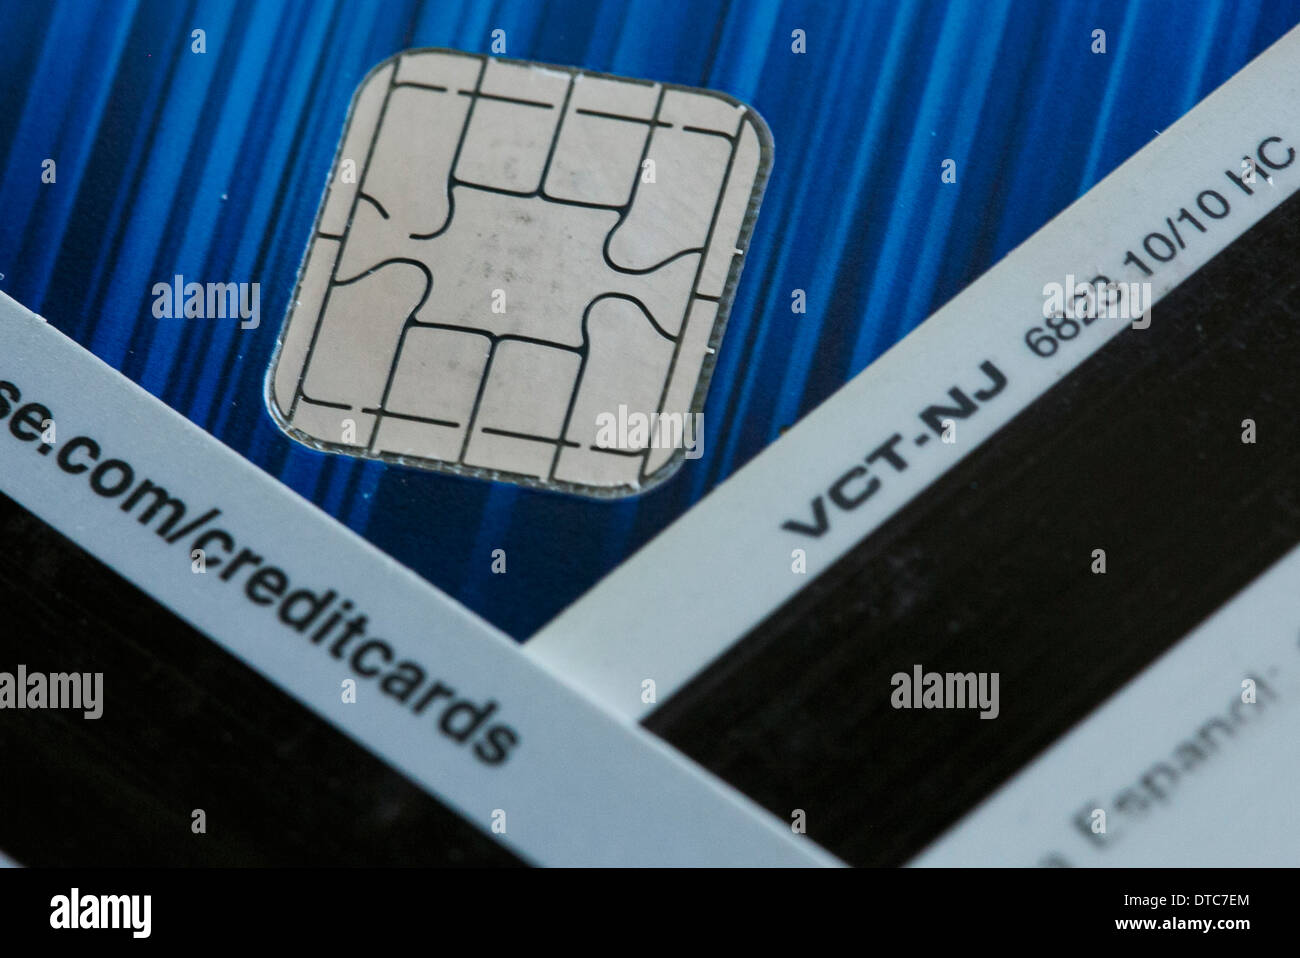 A Visa credit card featuring an EMV chip, also known as 'chip and PIN' juxtaposed with a magnetic strip card. Stock Photo